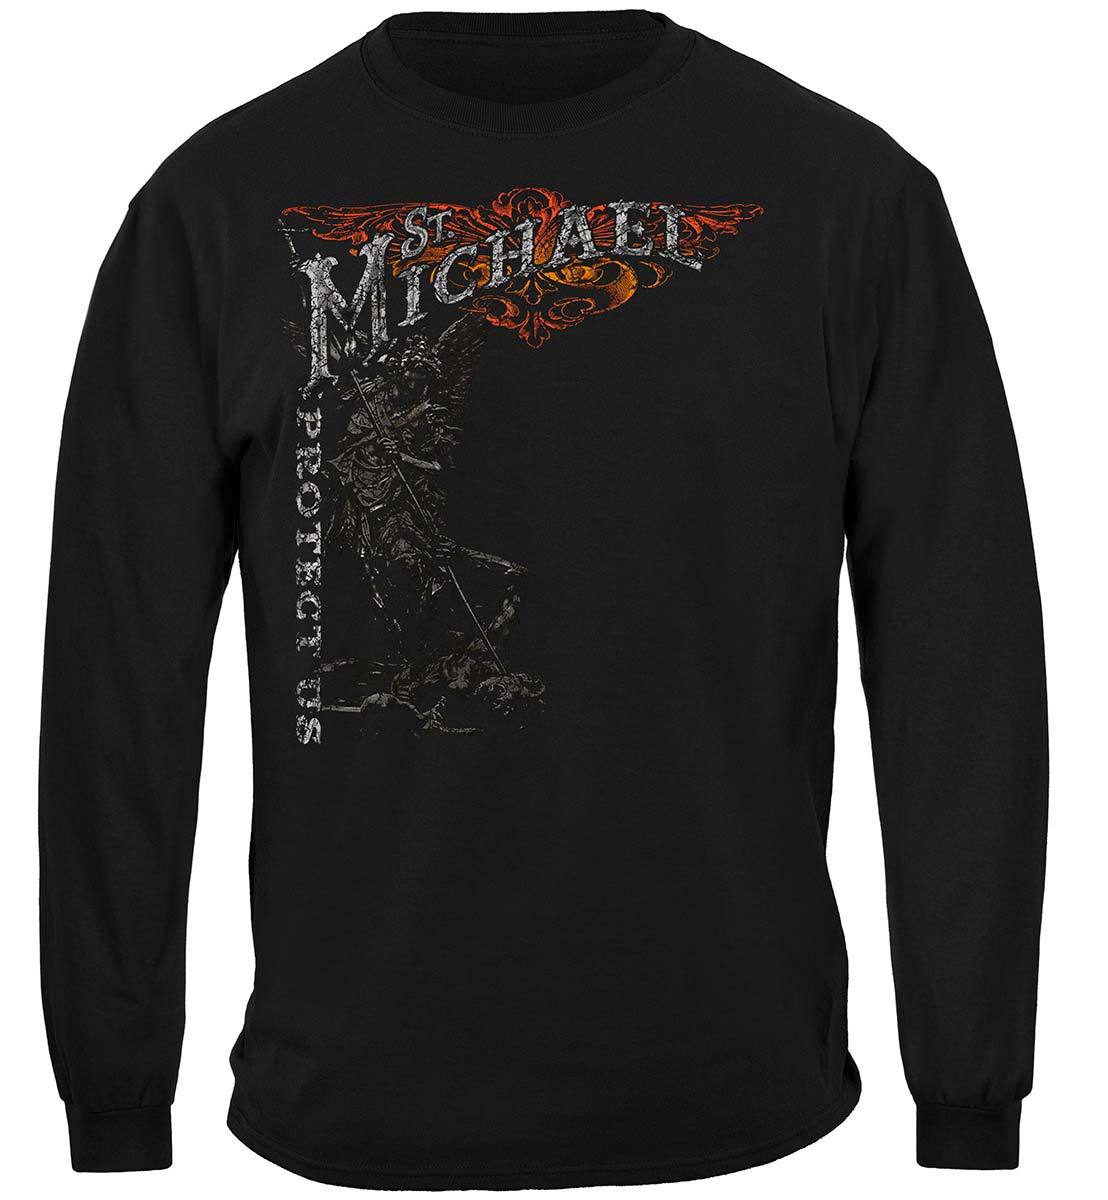 Firefighter St. Michael&#39;s Protect Us Silver Foil Premium Long Sleeves